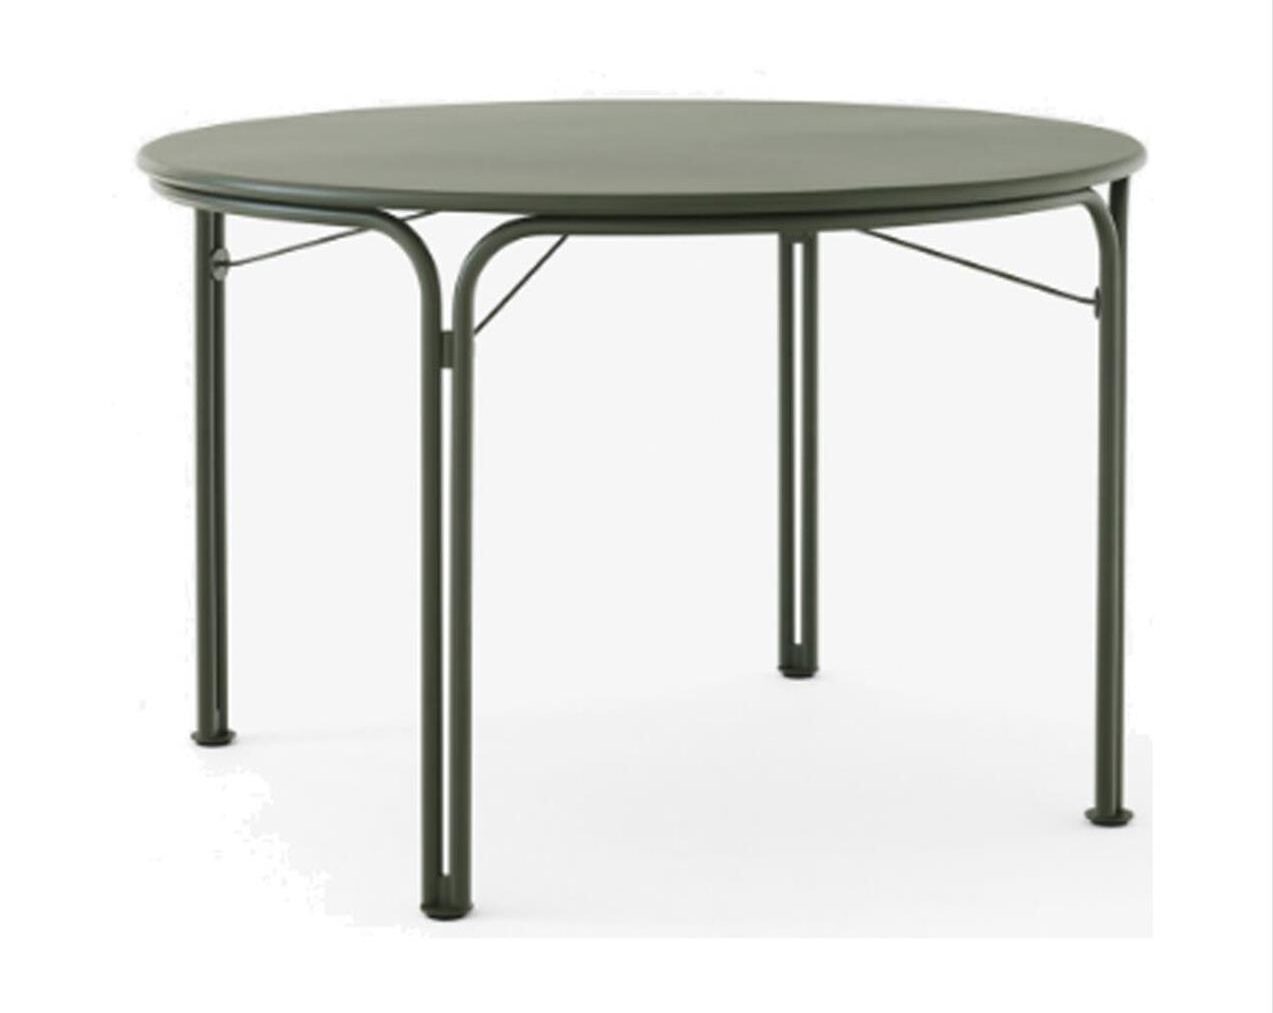 Thorvald-SC98-Dining-Table-Round-Ø115-Bronze-Green